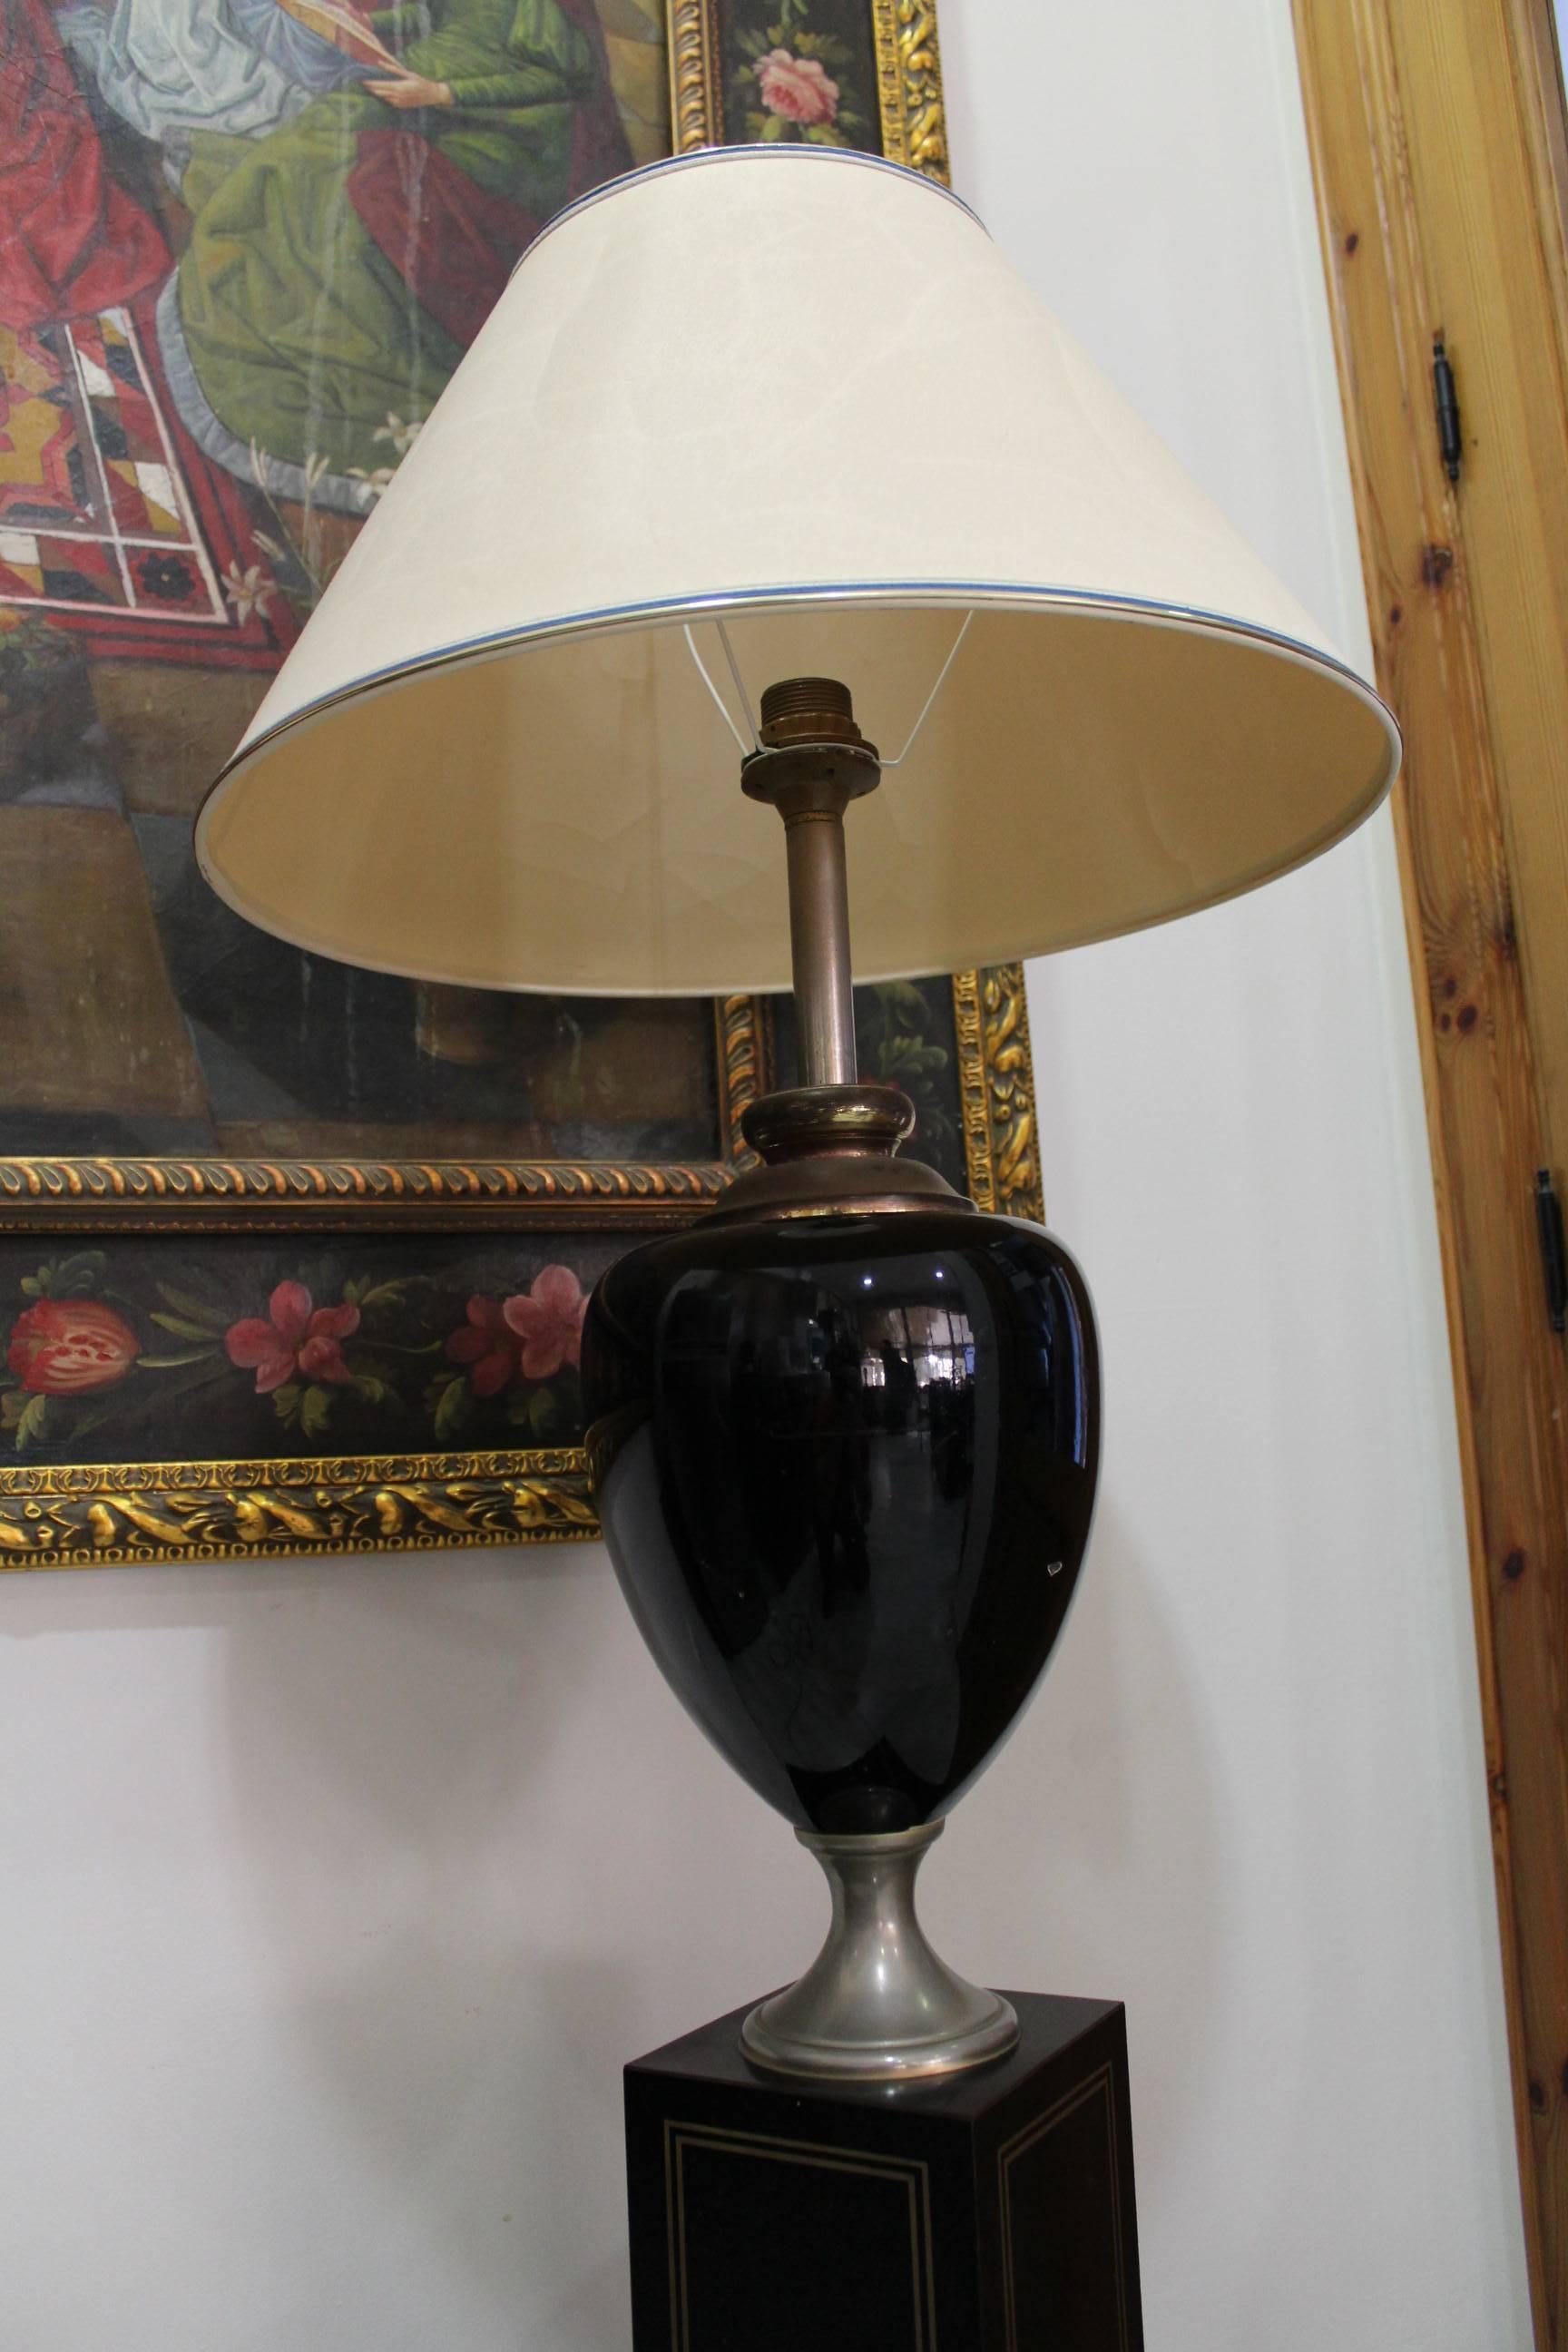 1970s French lamp signed by Le Dauphin Lighting house. A rectangular Formica lined base, a central glazed ceramic urn, lampshade and bronze fittings.